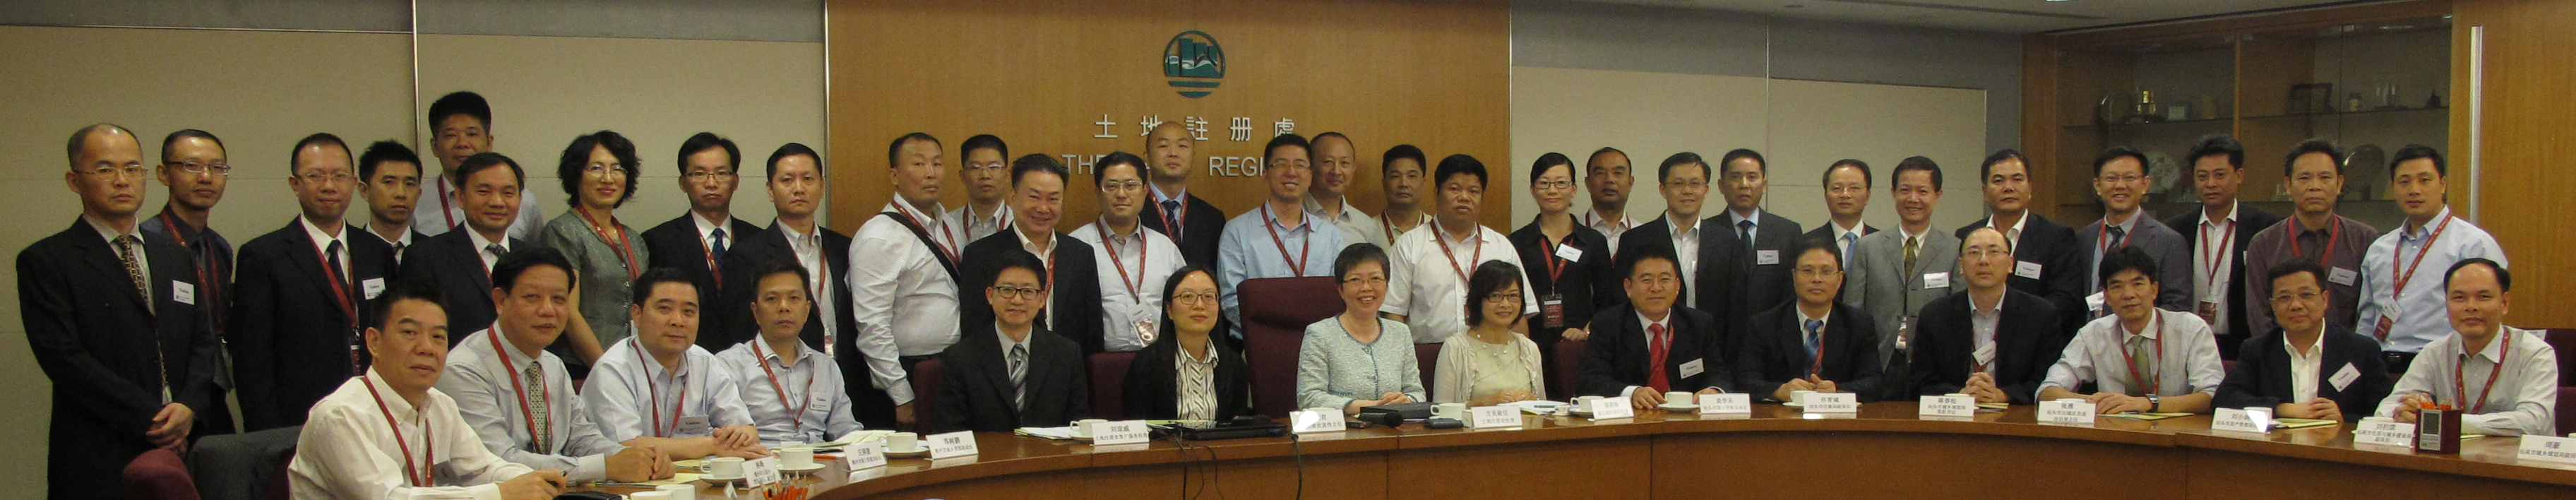 Senior Executives from Eastern Guangdong and the representatives of the Land Registry